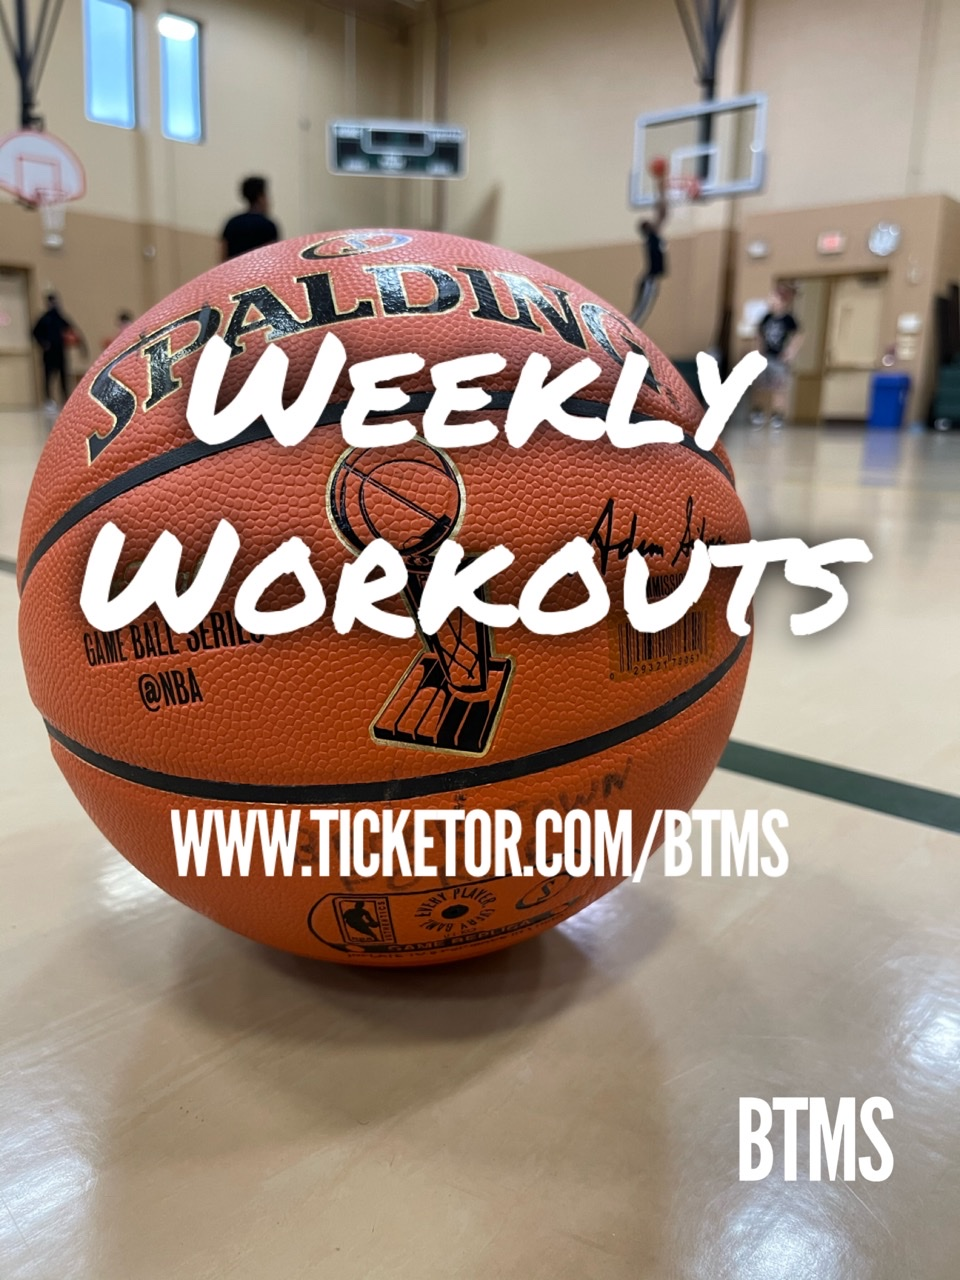 Weekly Workouts Basketball workout for skills, knowledge and basketball conditioning on dic. 31, 00:00@Oak Lawn Pavilion - Compra entradas y obtén información enBTMS LLC 